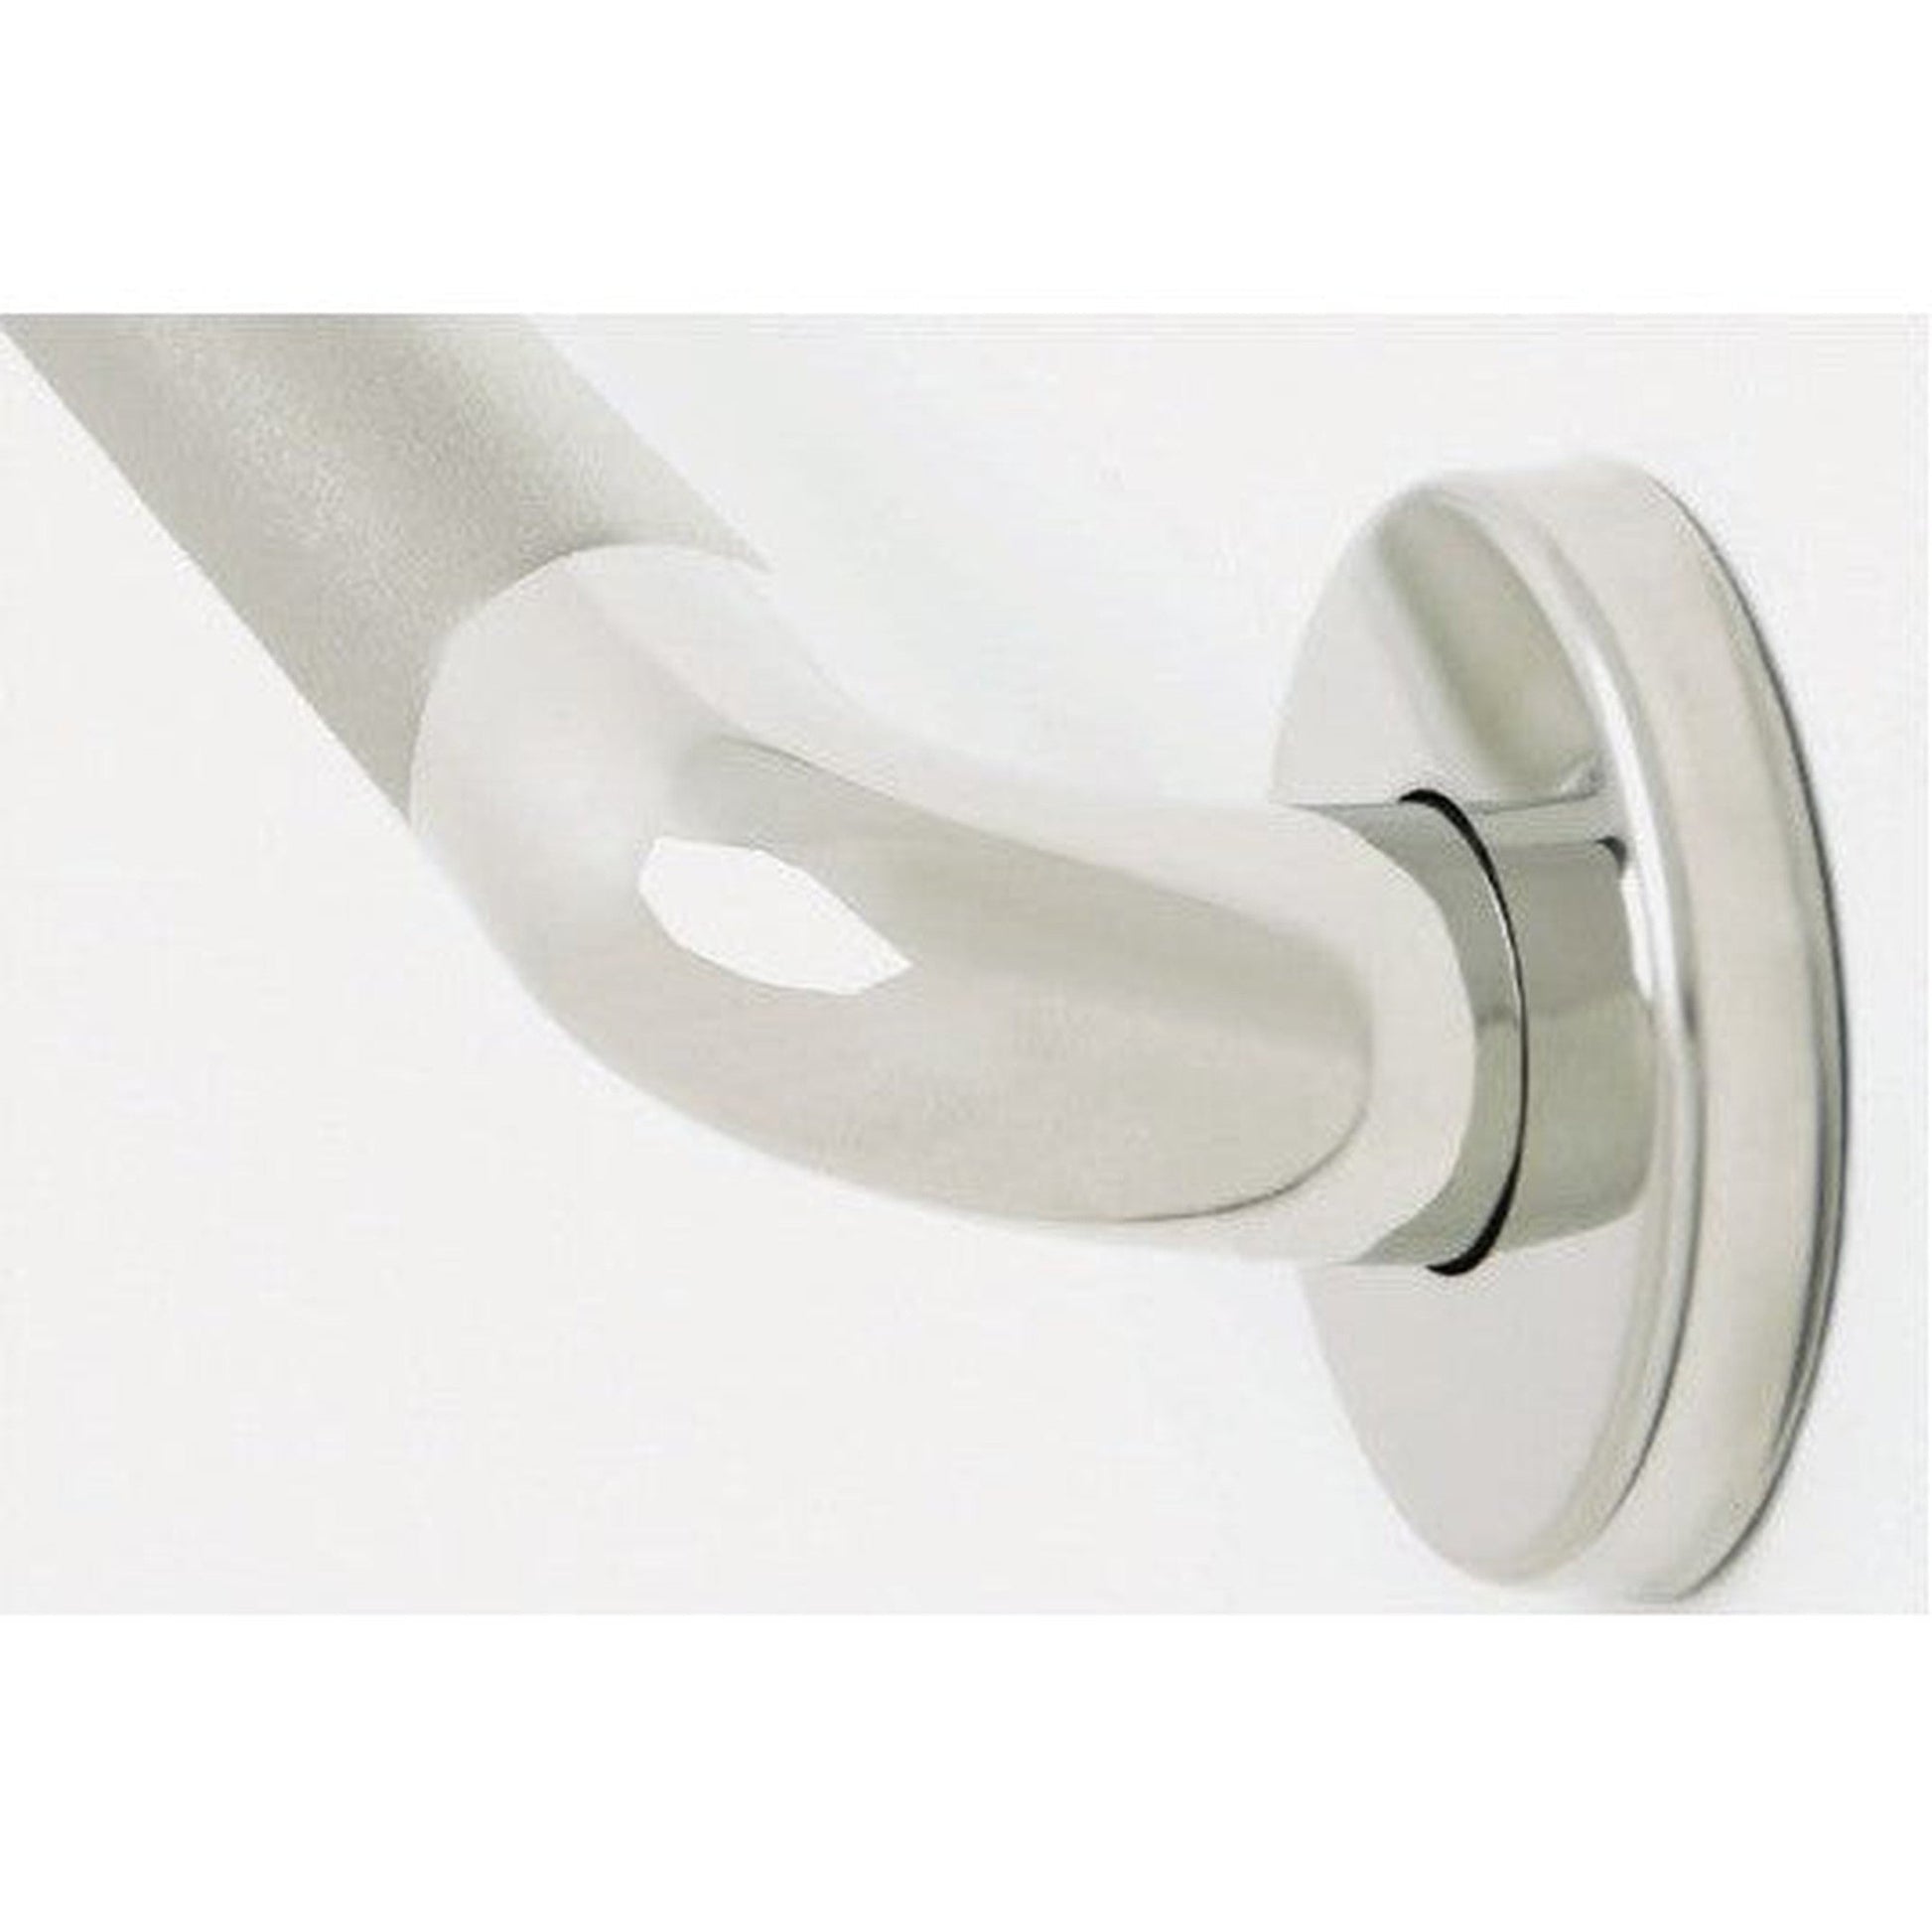 Seachrome Signature GZ Series 30" Peened With Polished Stainless Steel Ends 1.25" Tube Diameter Straight Grab Bar